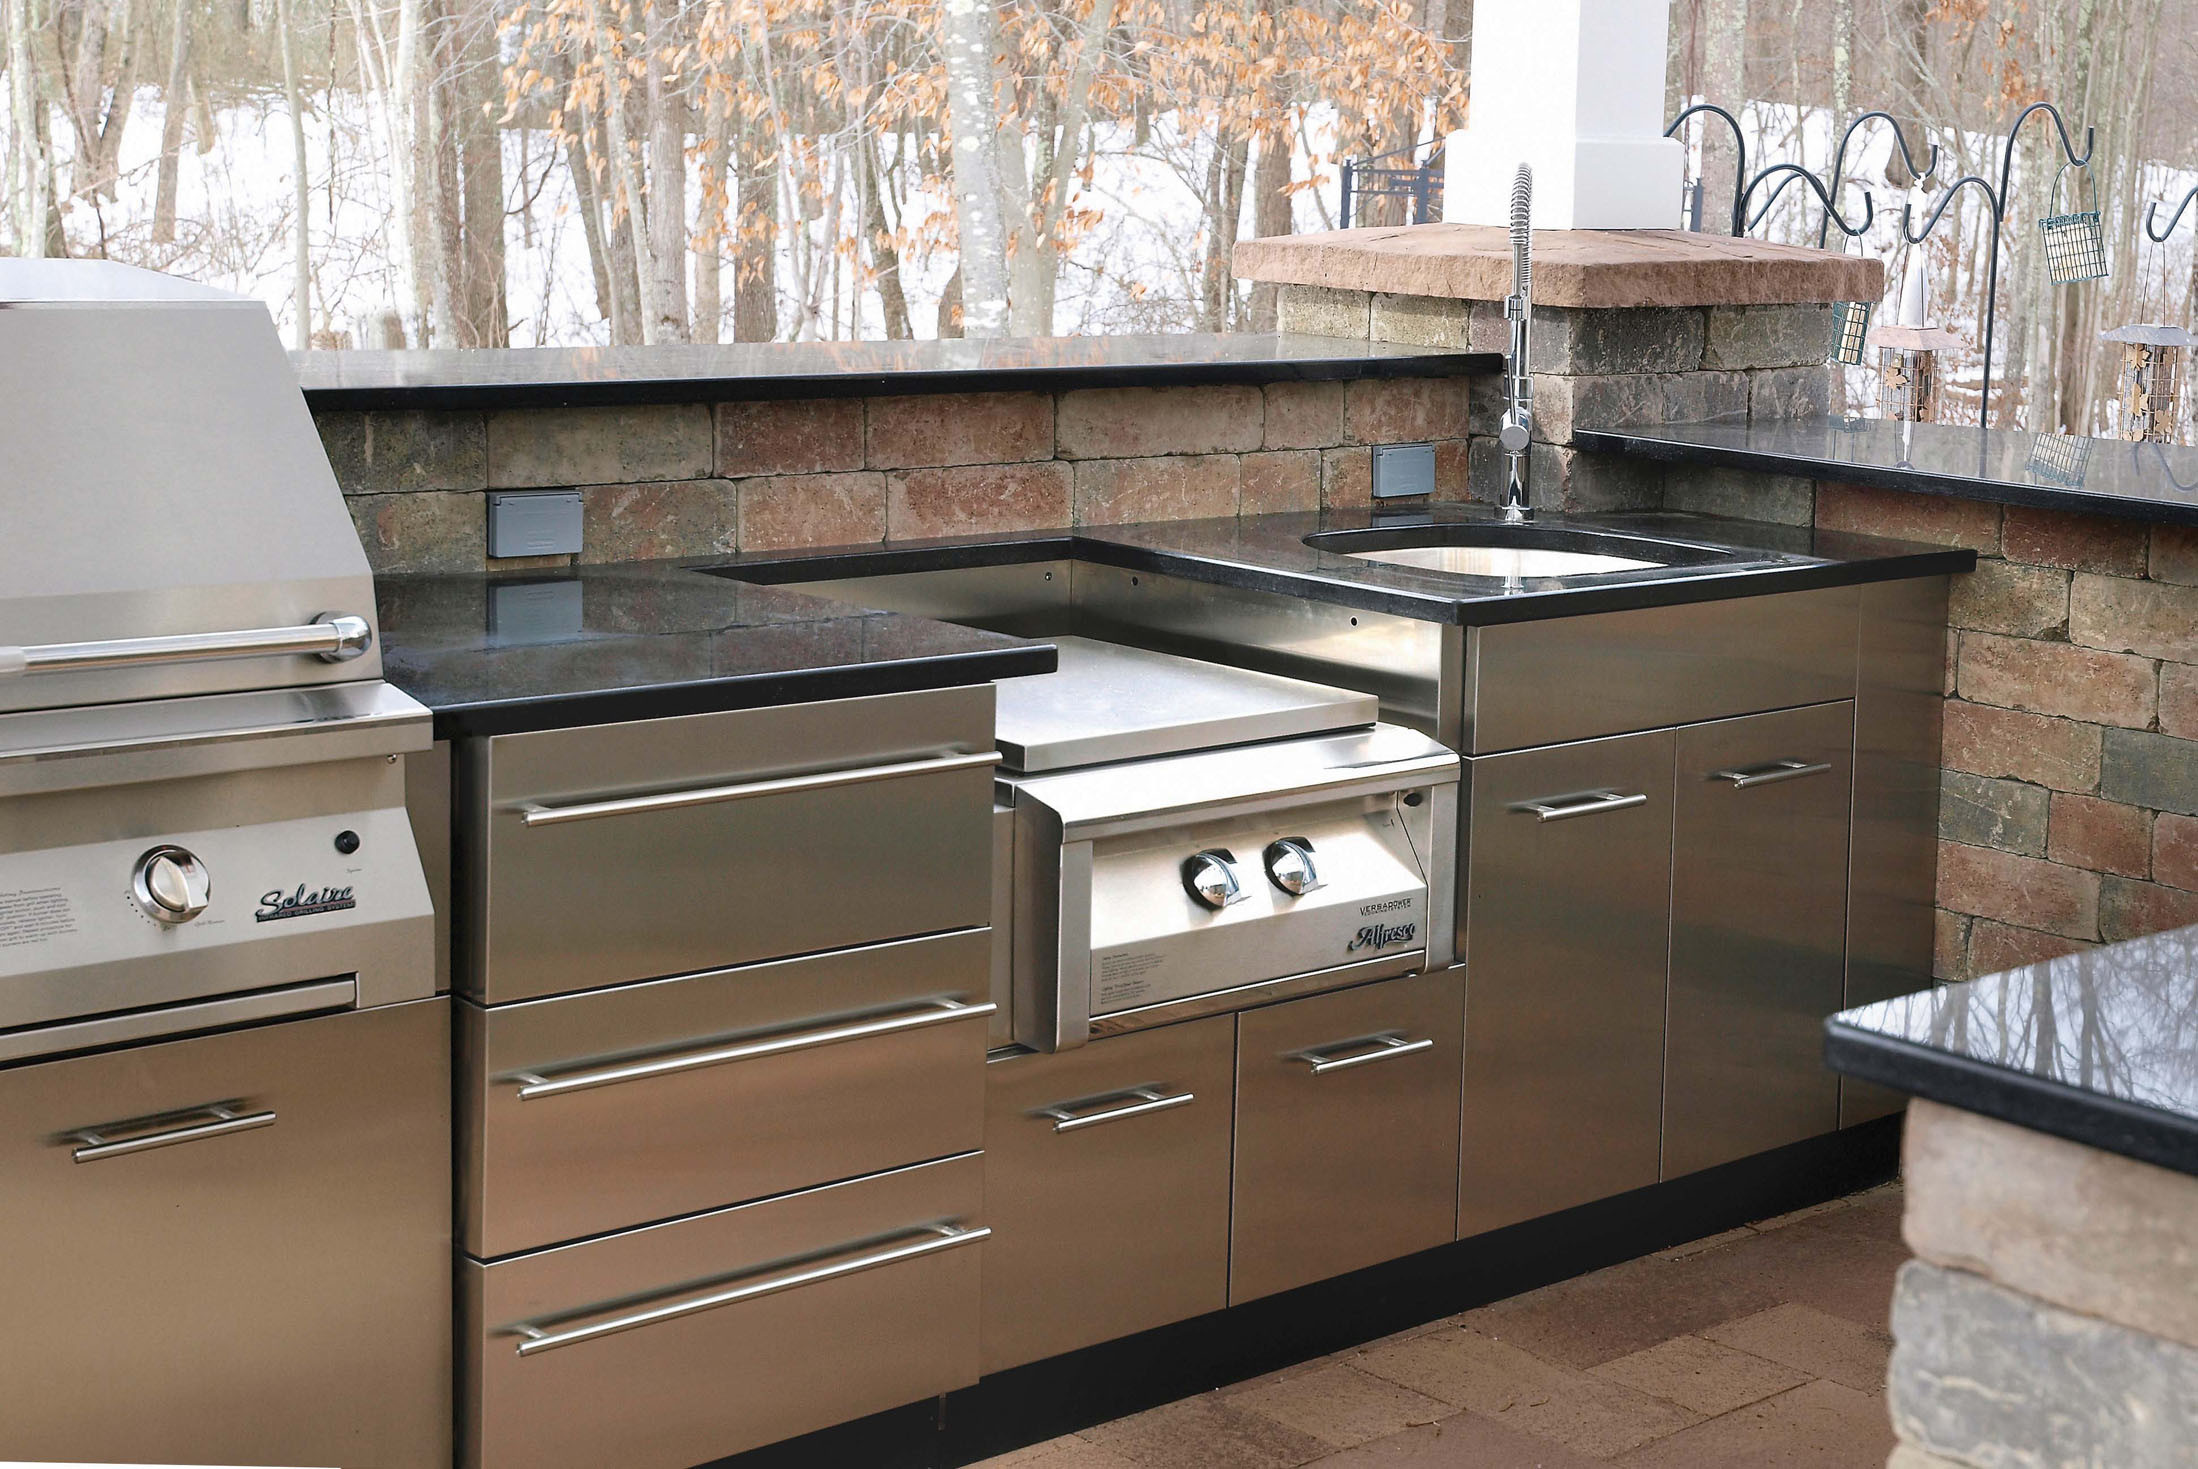 Stainless Steel Outdoor Kitchen
 Outdoor Stainless Kitchen in winter in CT